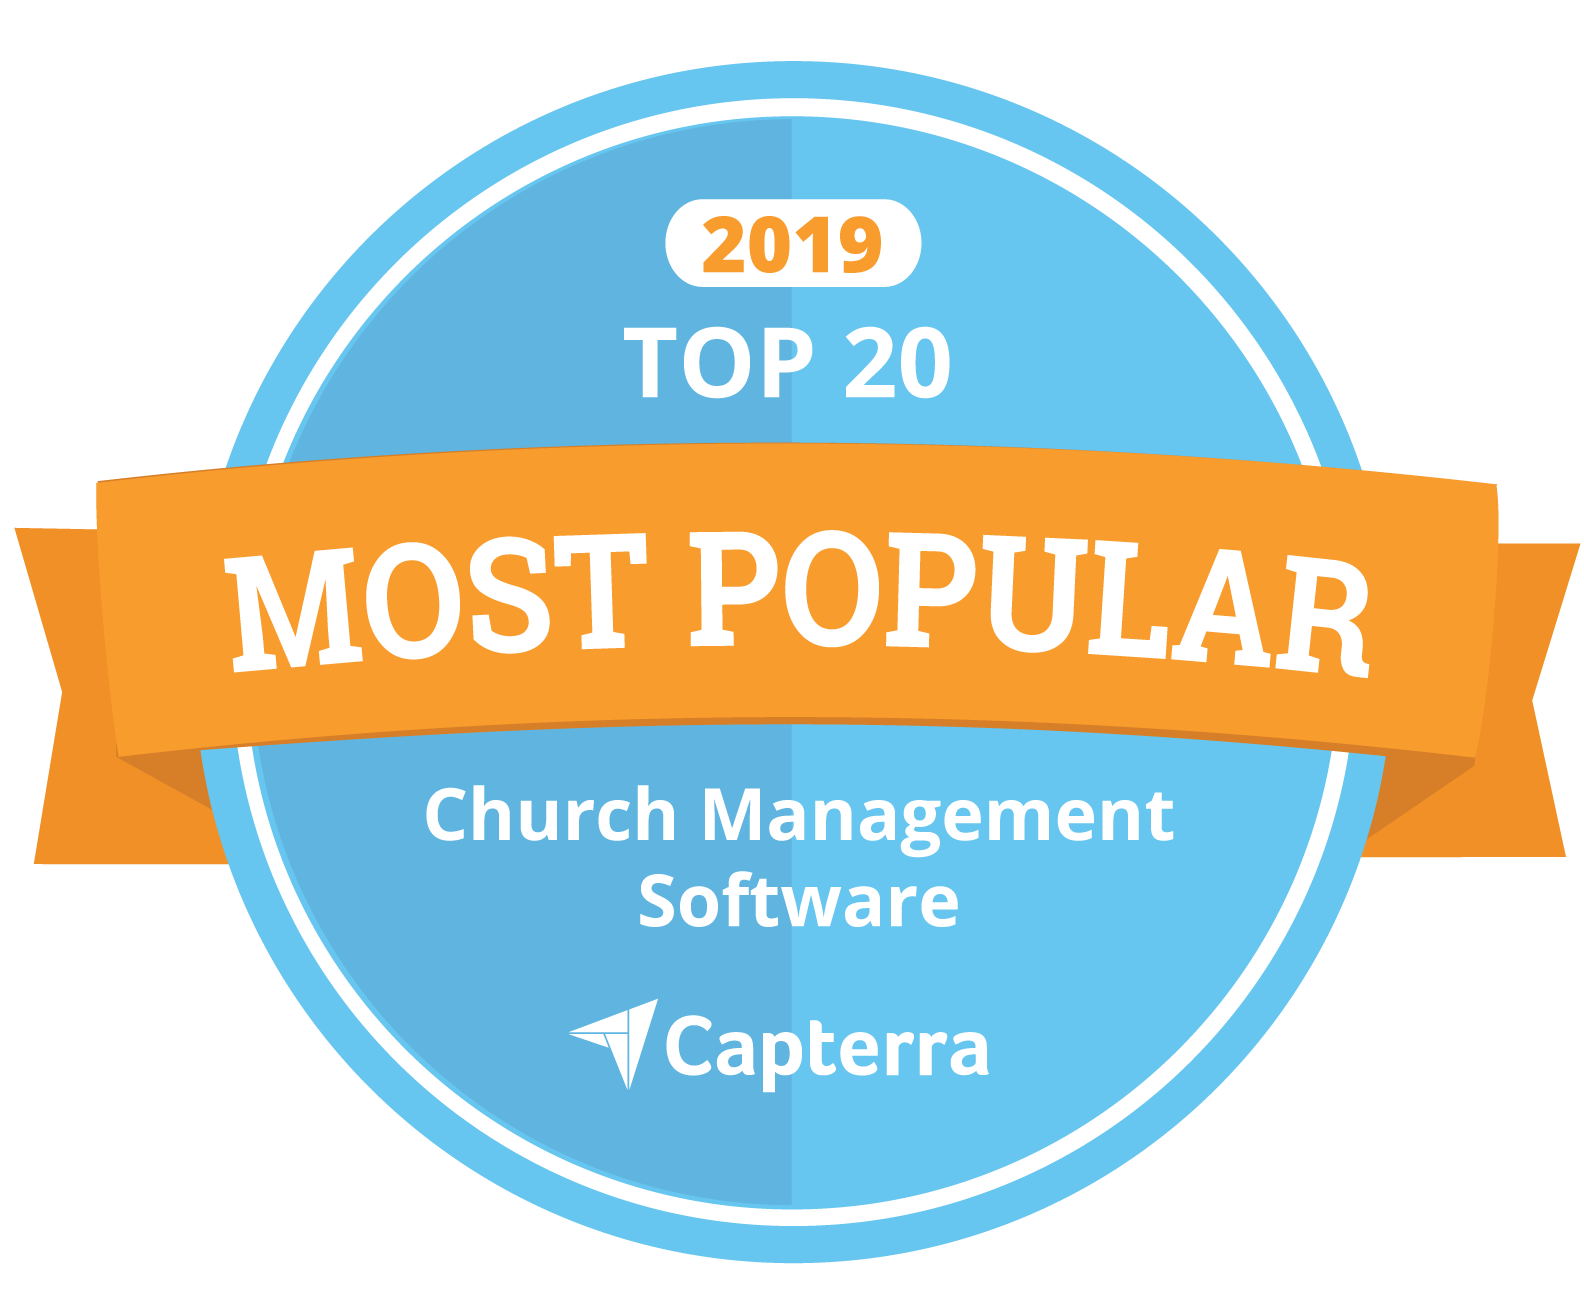 Voted One of the Most Popular Church Management Softwares by Capterra Reviews